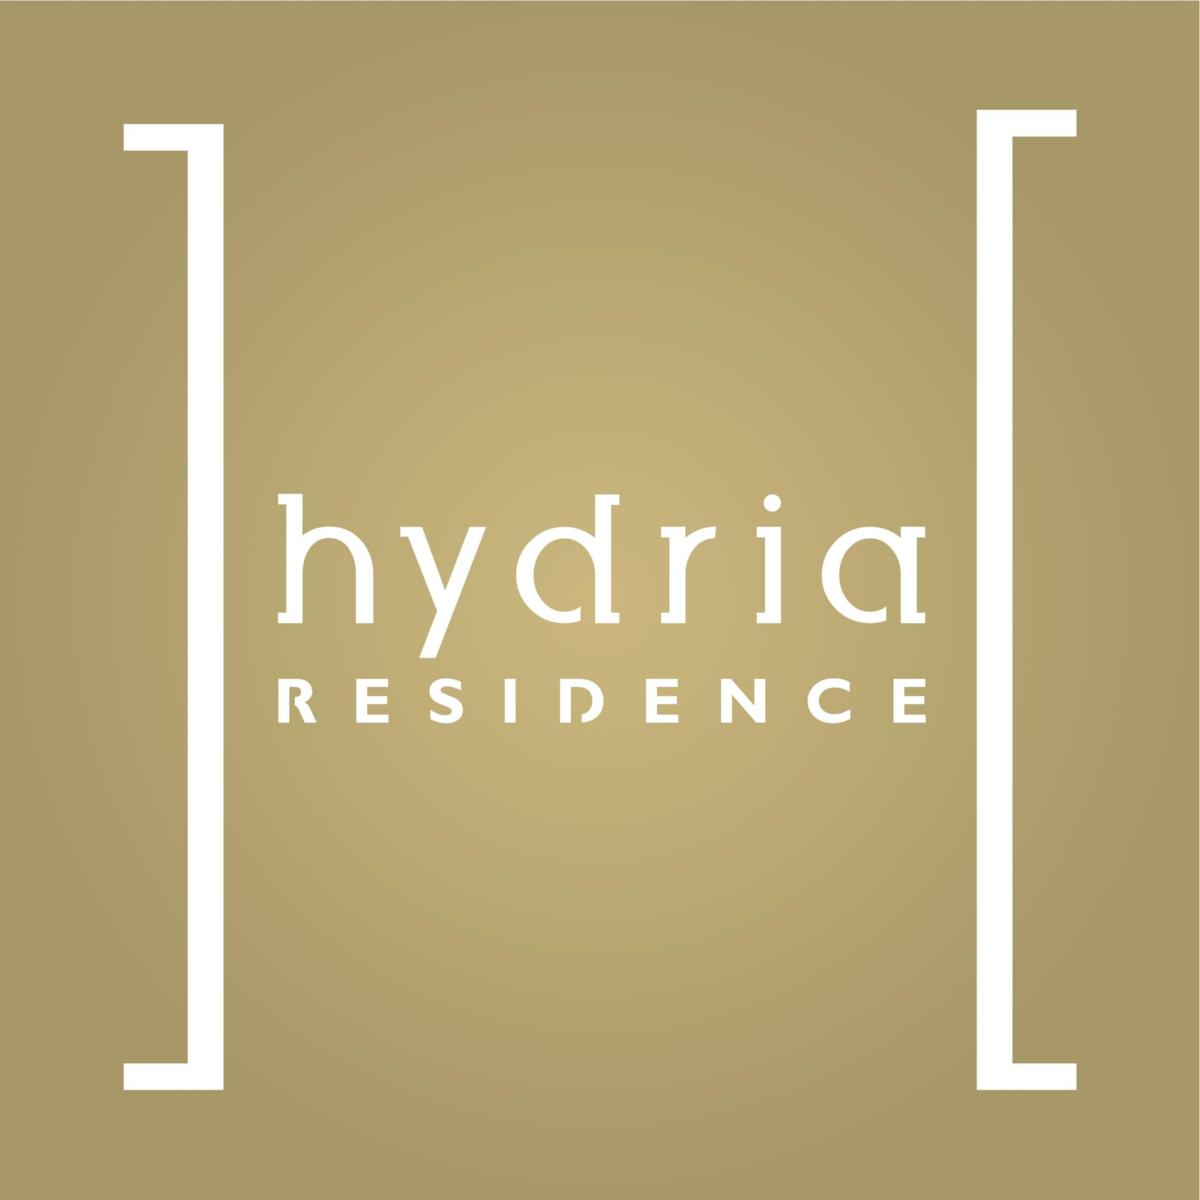 Hydria residence Master